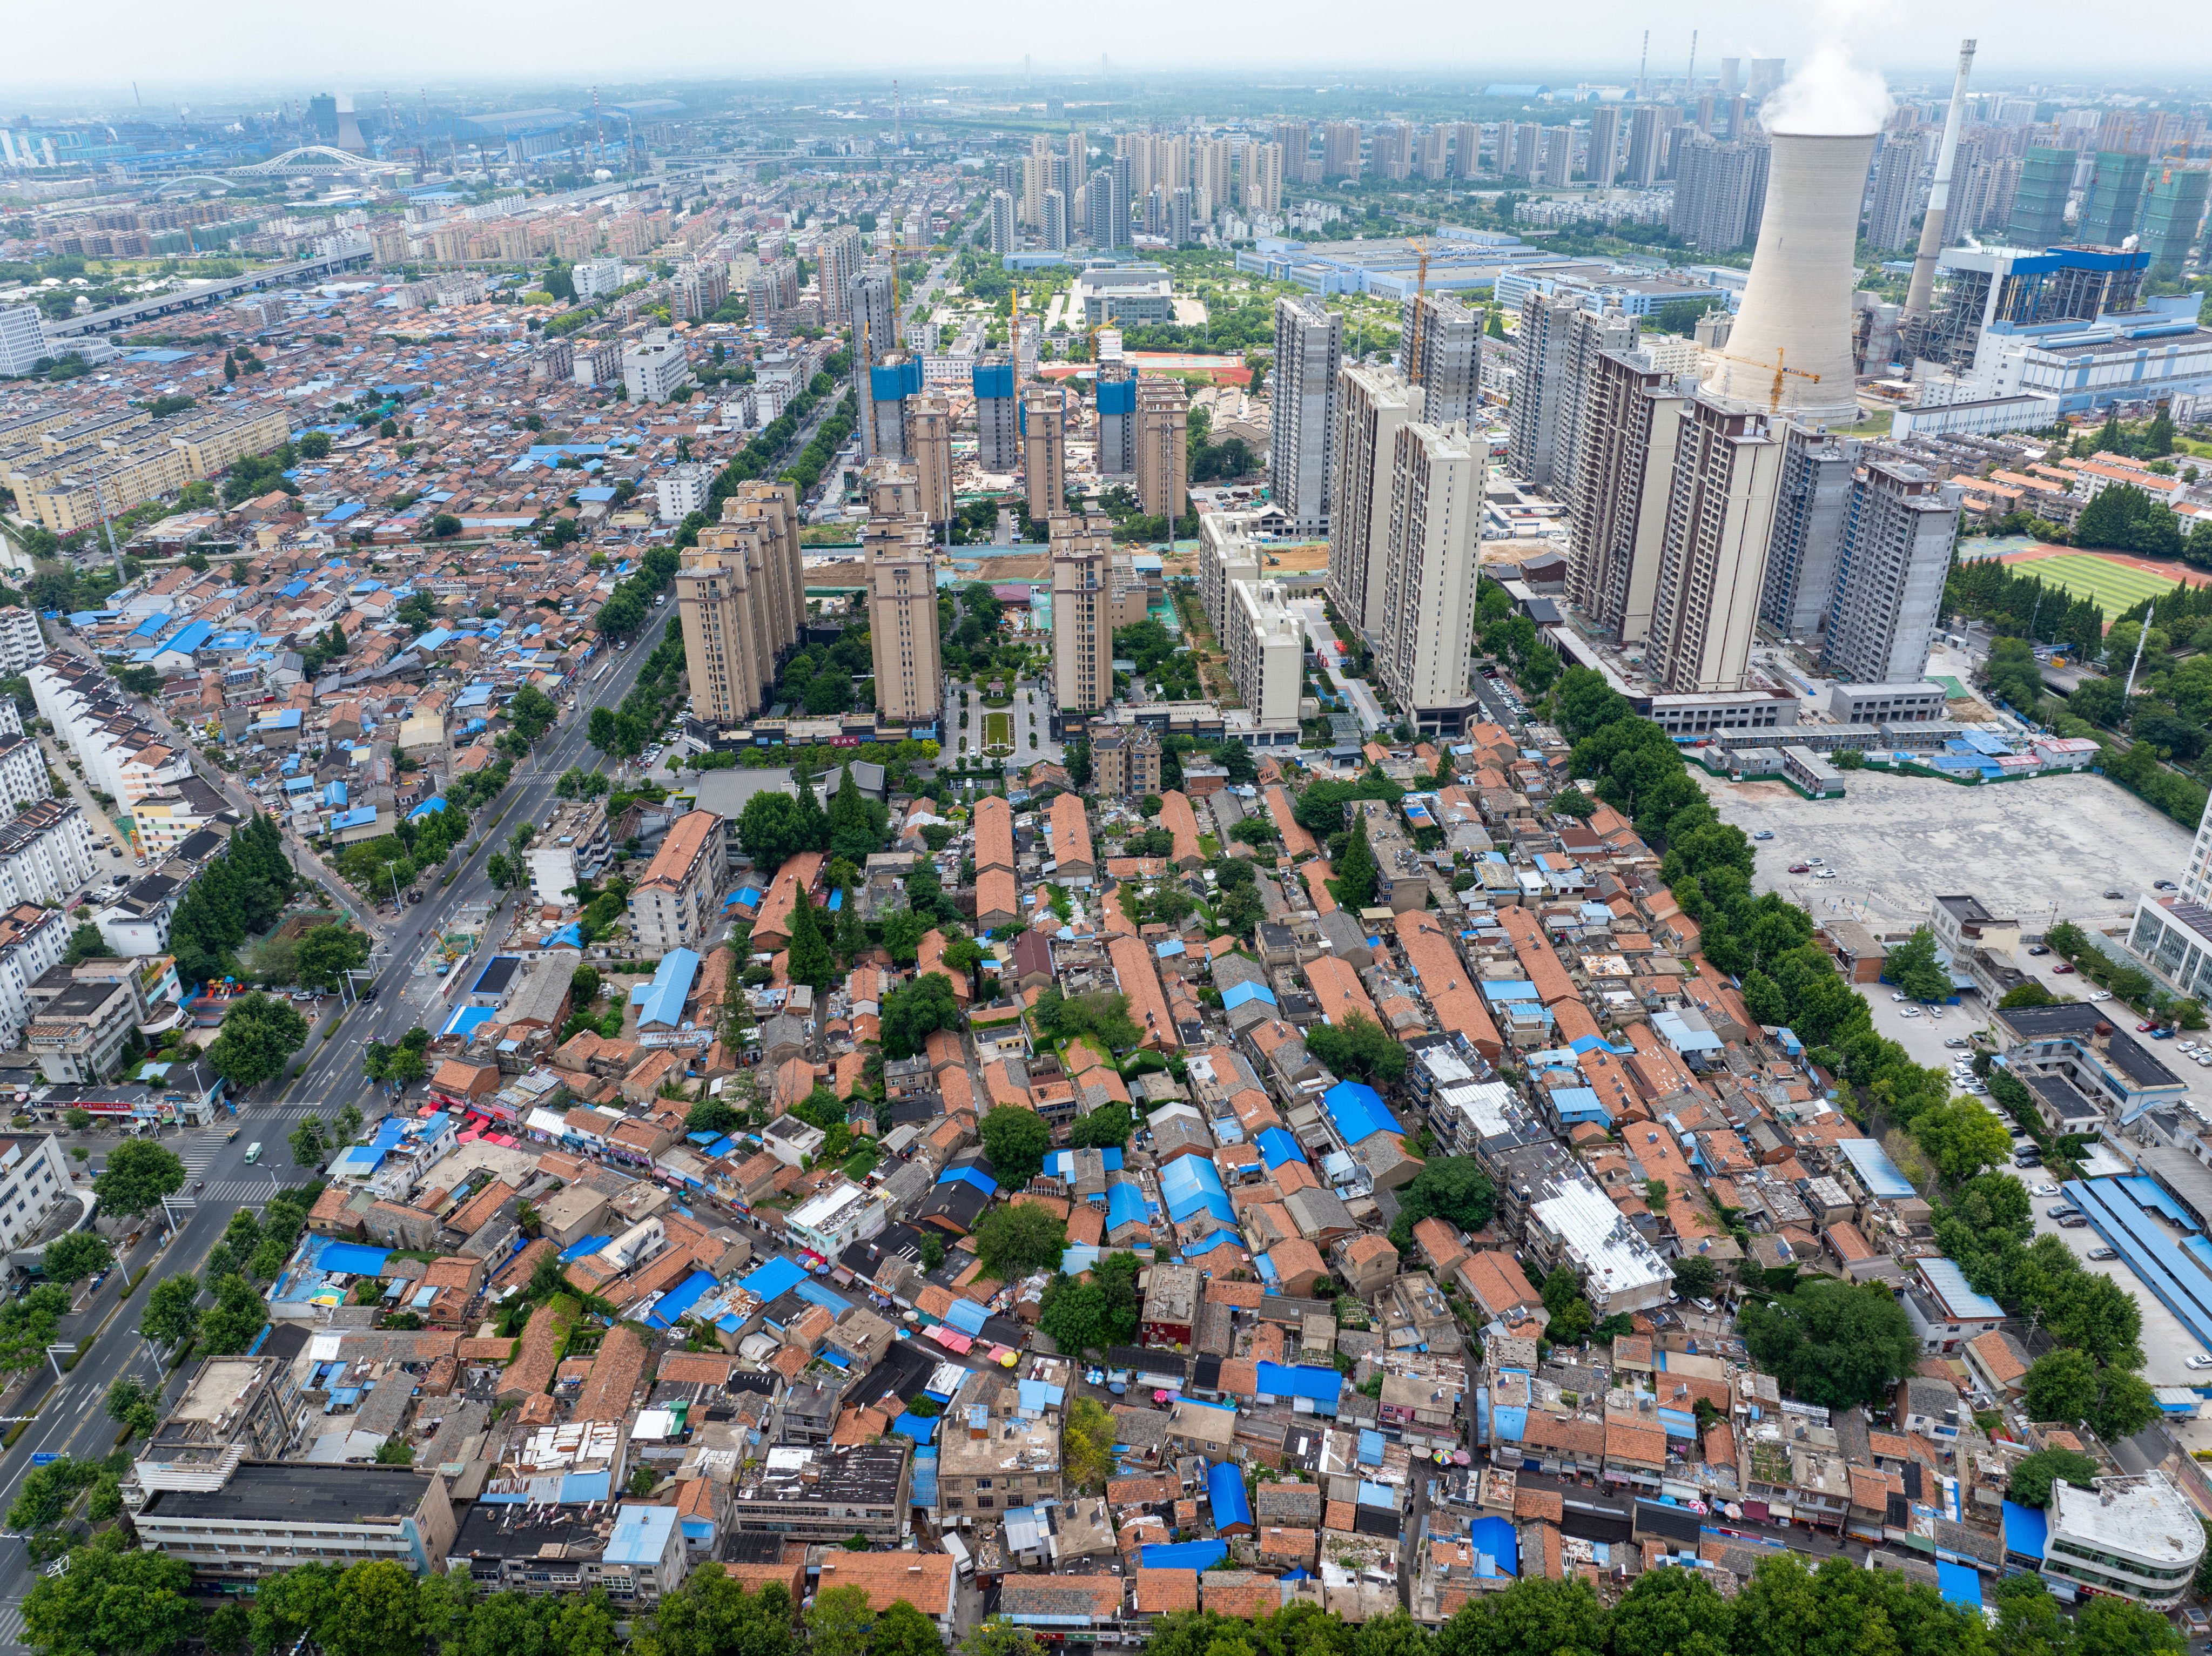 China’s ongoing crisis in the property market has stoked fears of an overseas spillover, an outcome most analysts say is unlikely. Photo: Getty Images